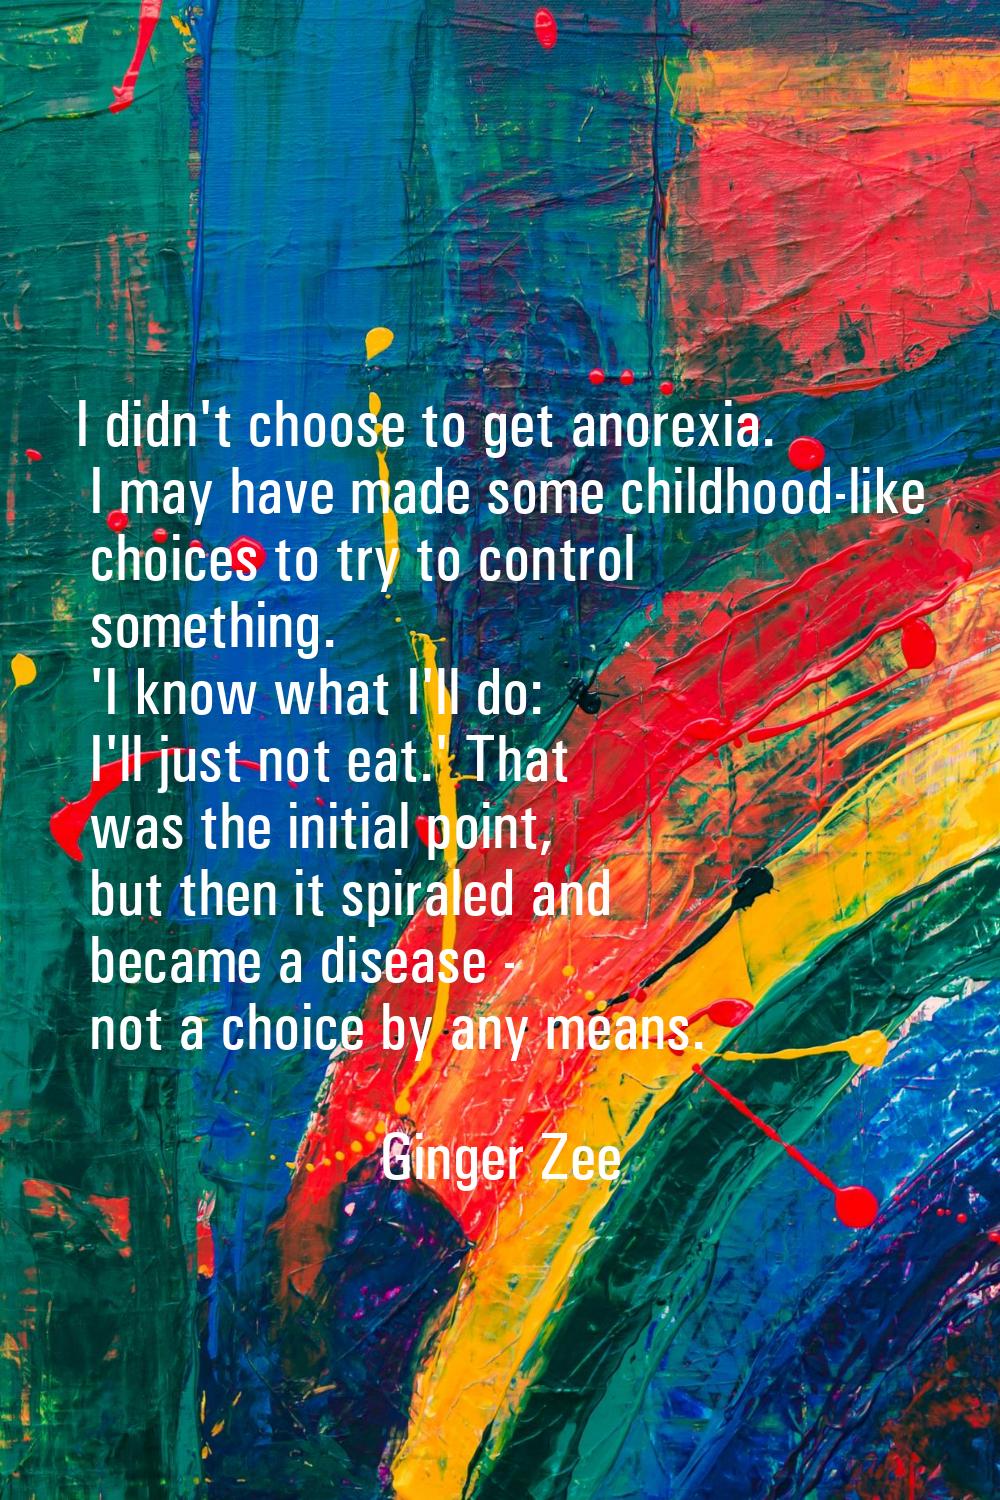 I didn't choose to get anorexia. I may have made some childhood-like choices to try to control some